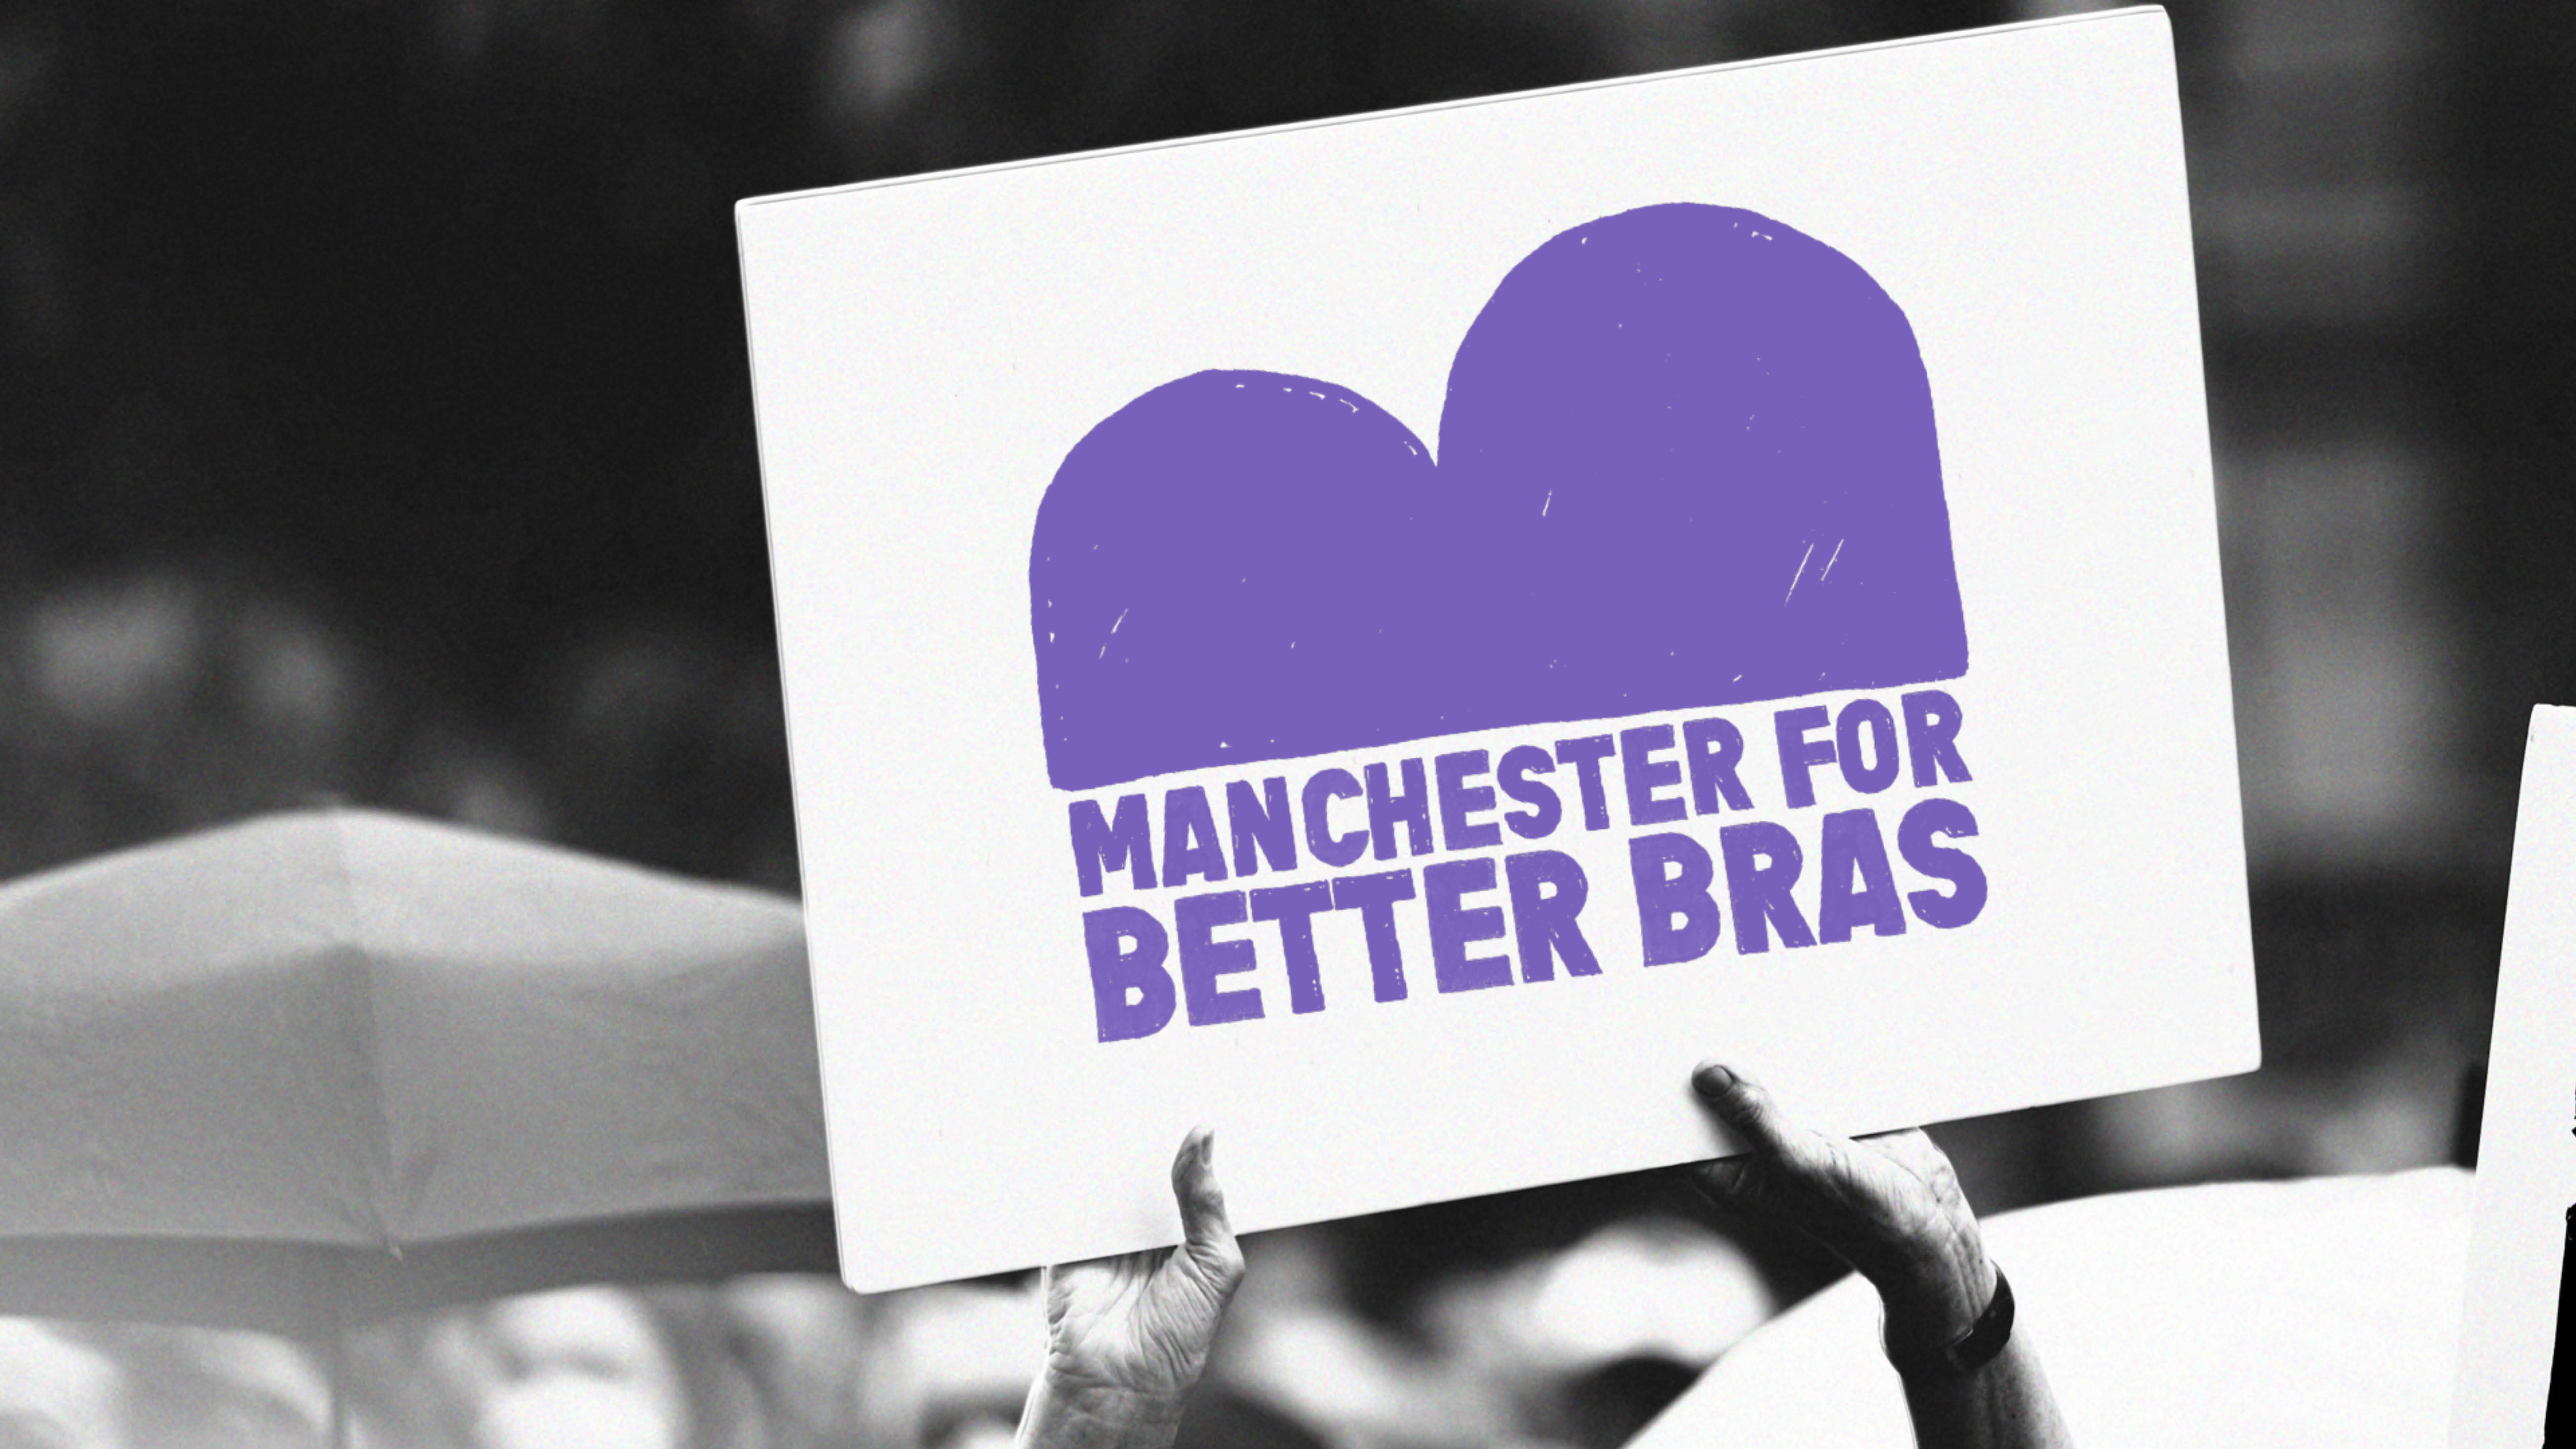 Event Identity Branding by Emma Watts presenting a pop up bra fitting event with protest-style visuals and copy. Thumbnail shows black and white image holding up sign with 'Manchester for Better Bras' in purple with a purple rounded logo.